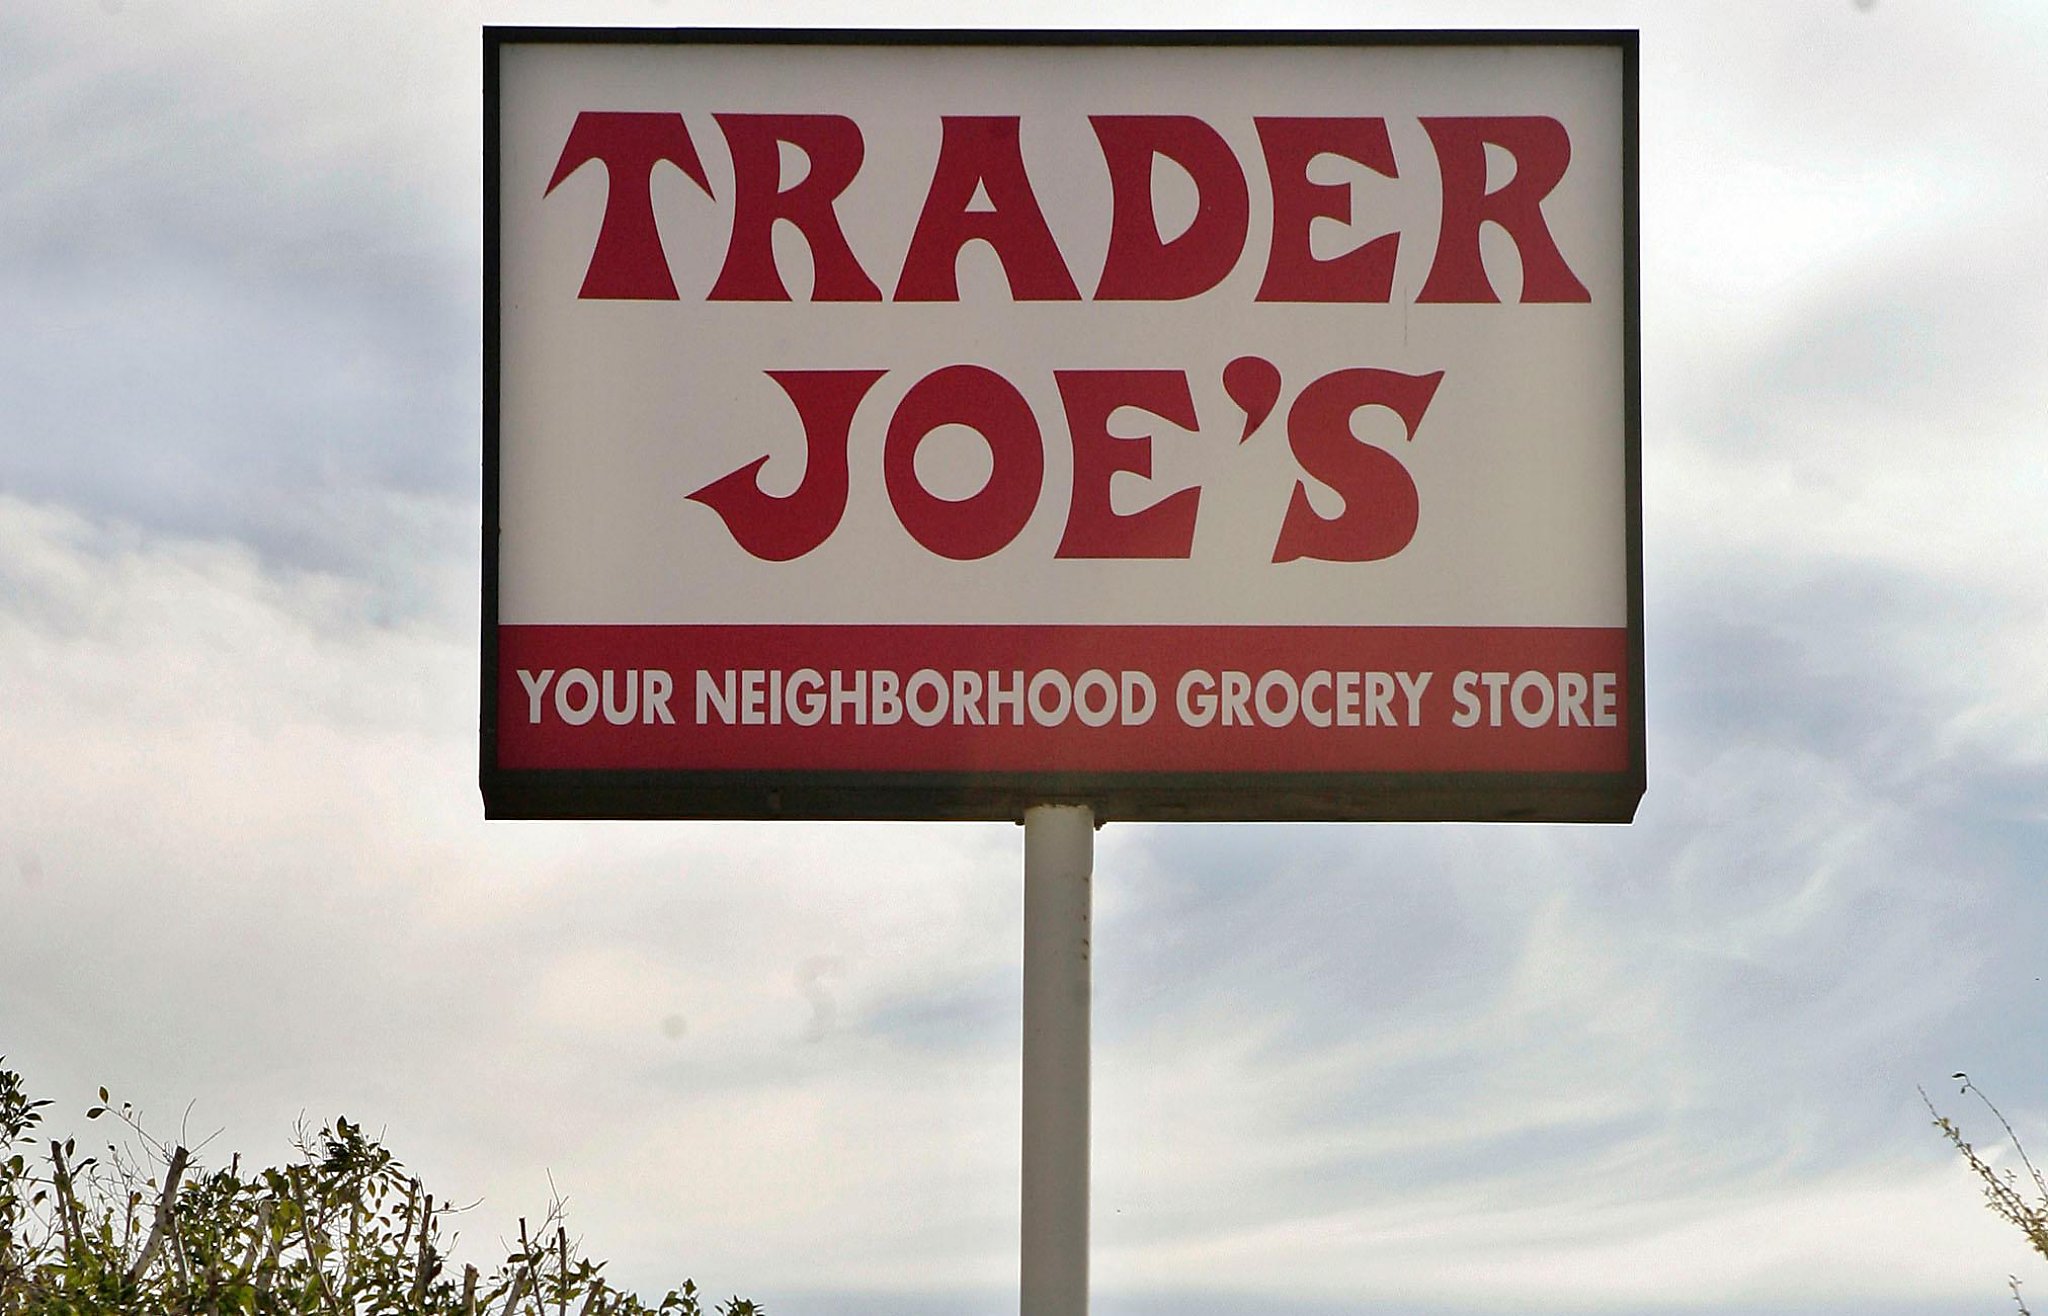 The “Burn the Mask” protest temporarily closes Fresno Trader Joe’s